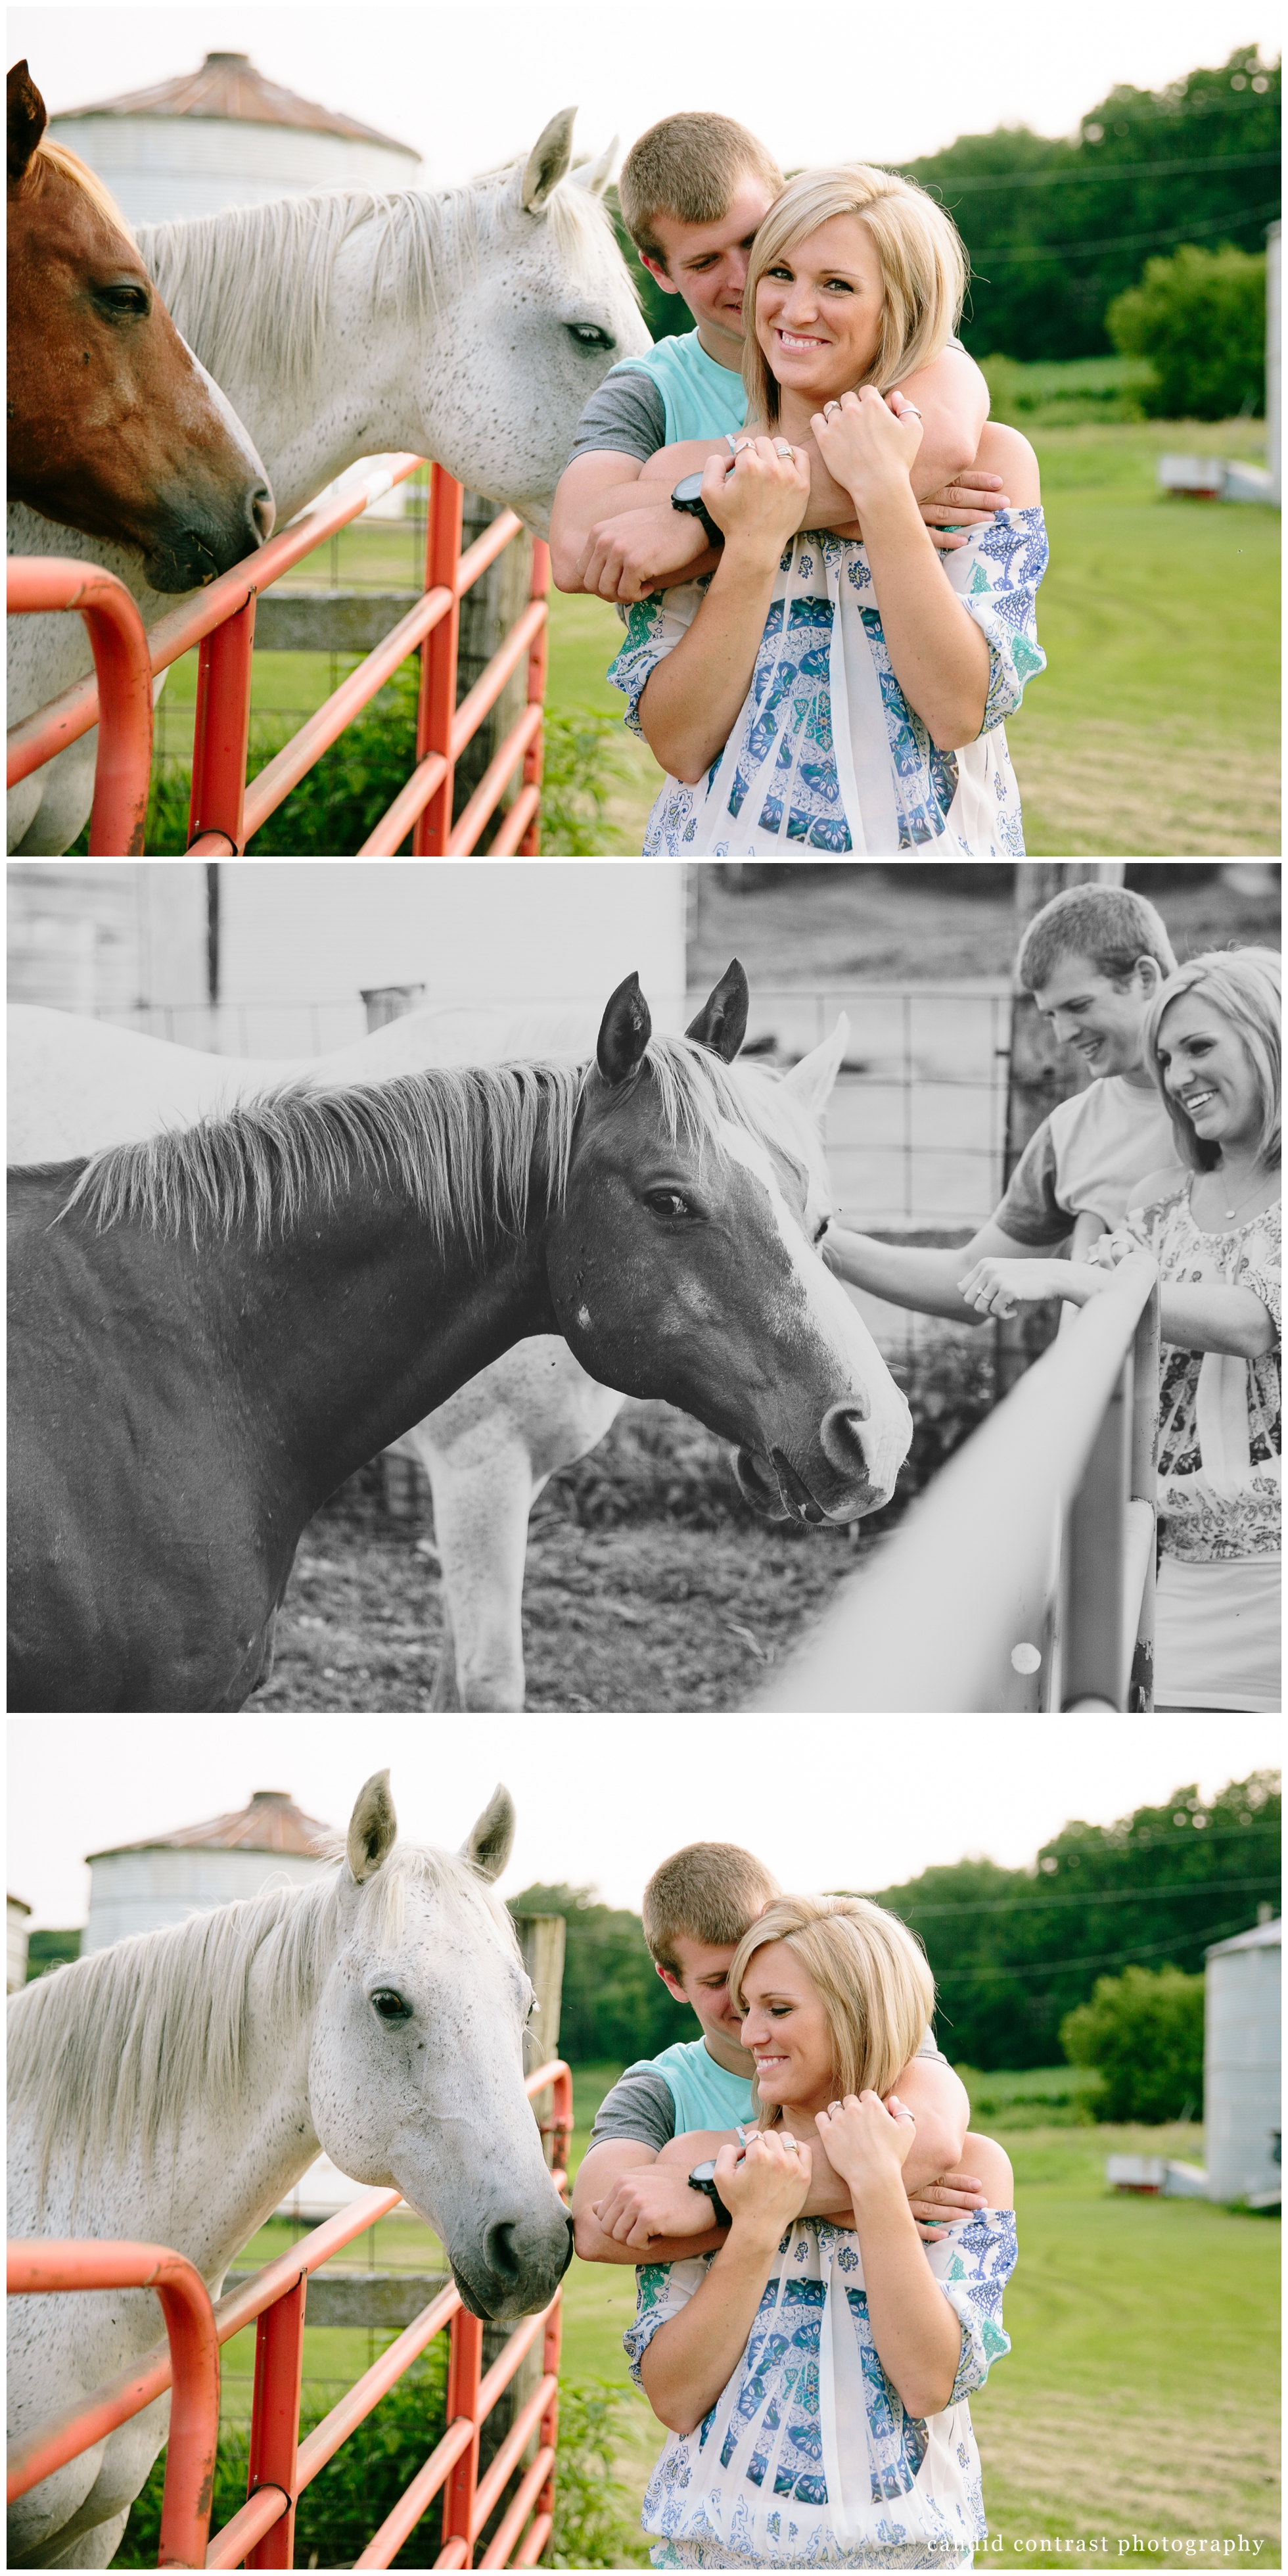 camping engagement session with horses, Bellevue IA engagement session, candid contrast photography